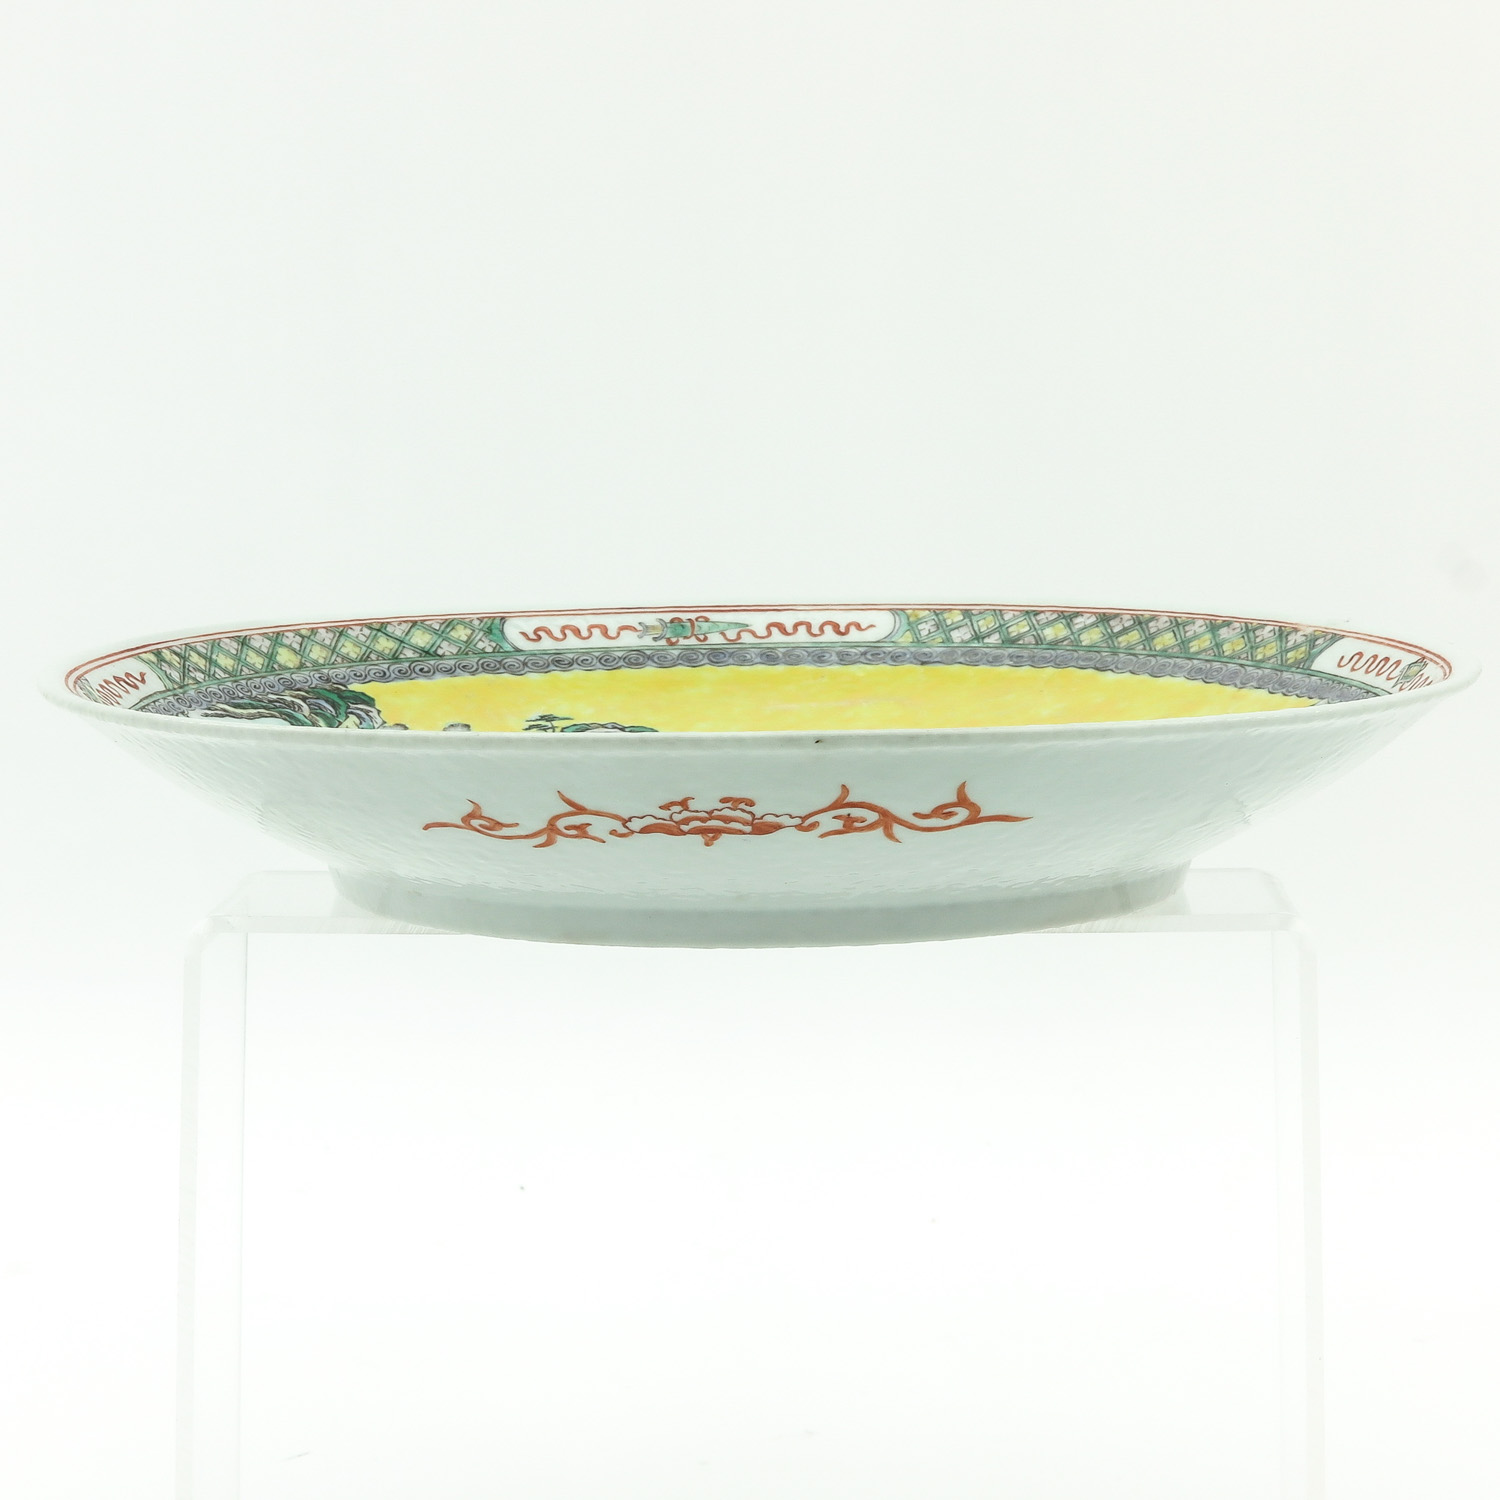 A Polychrome Decor Charger - Image 4 of 8